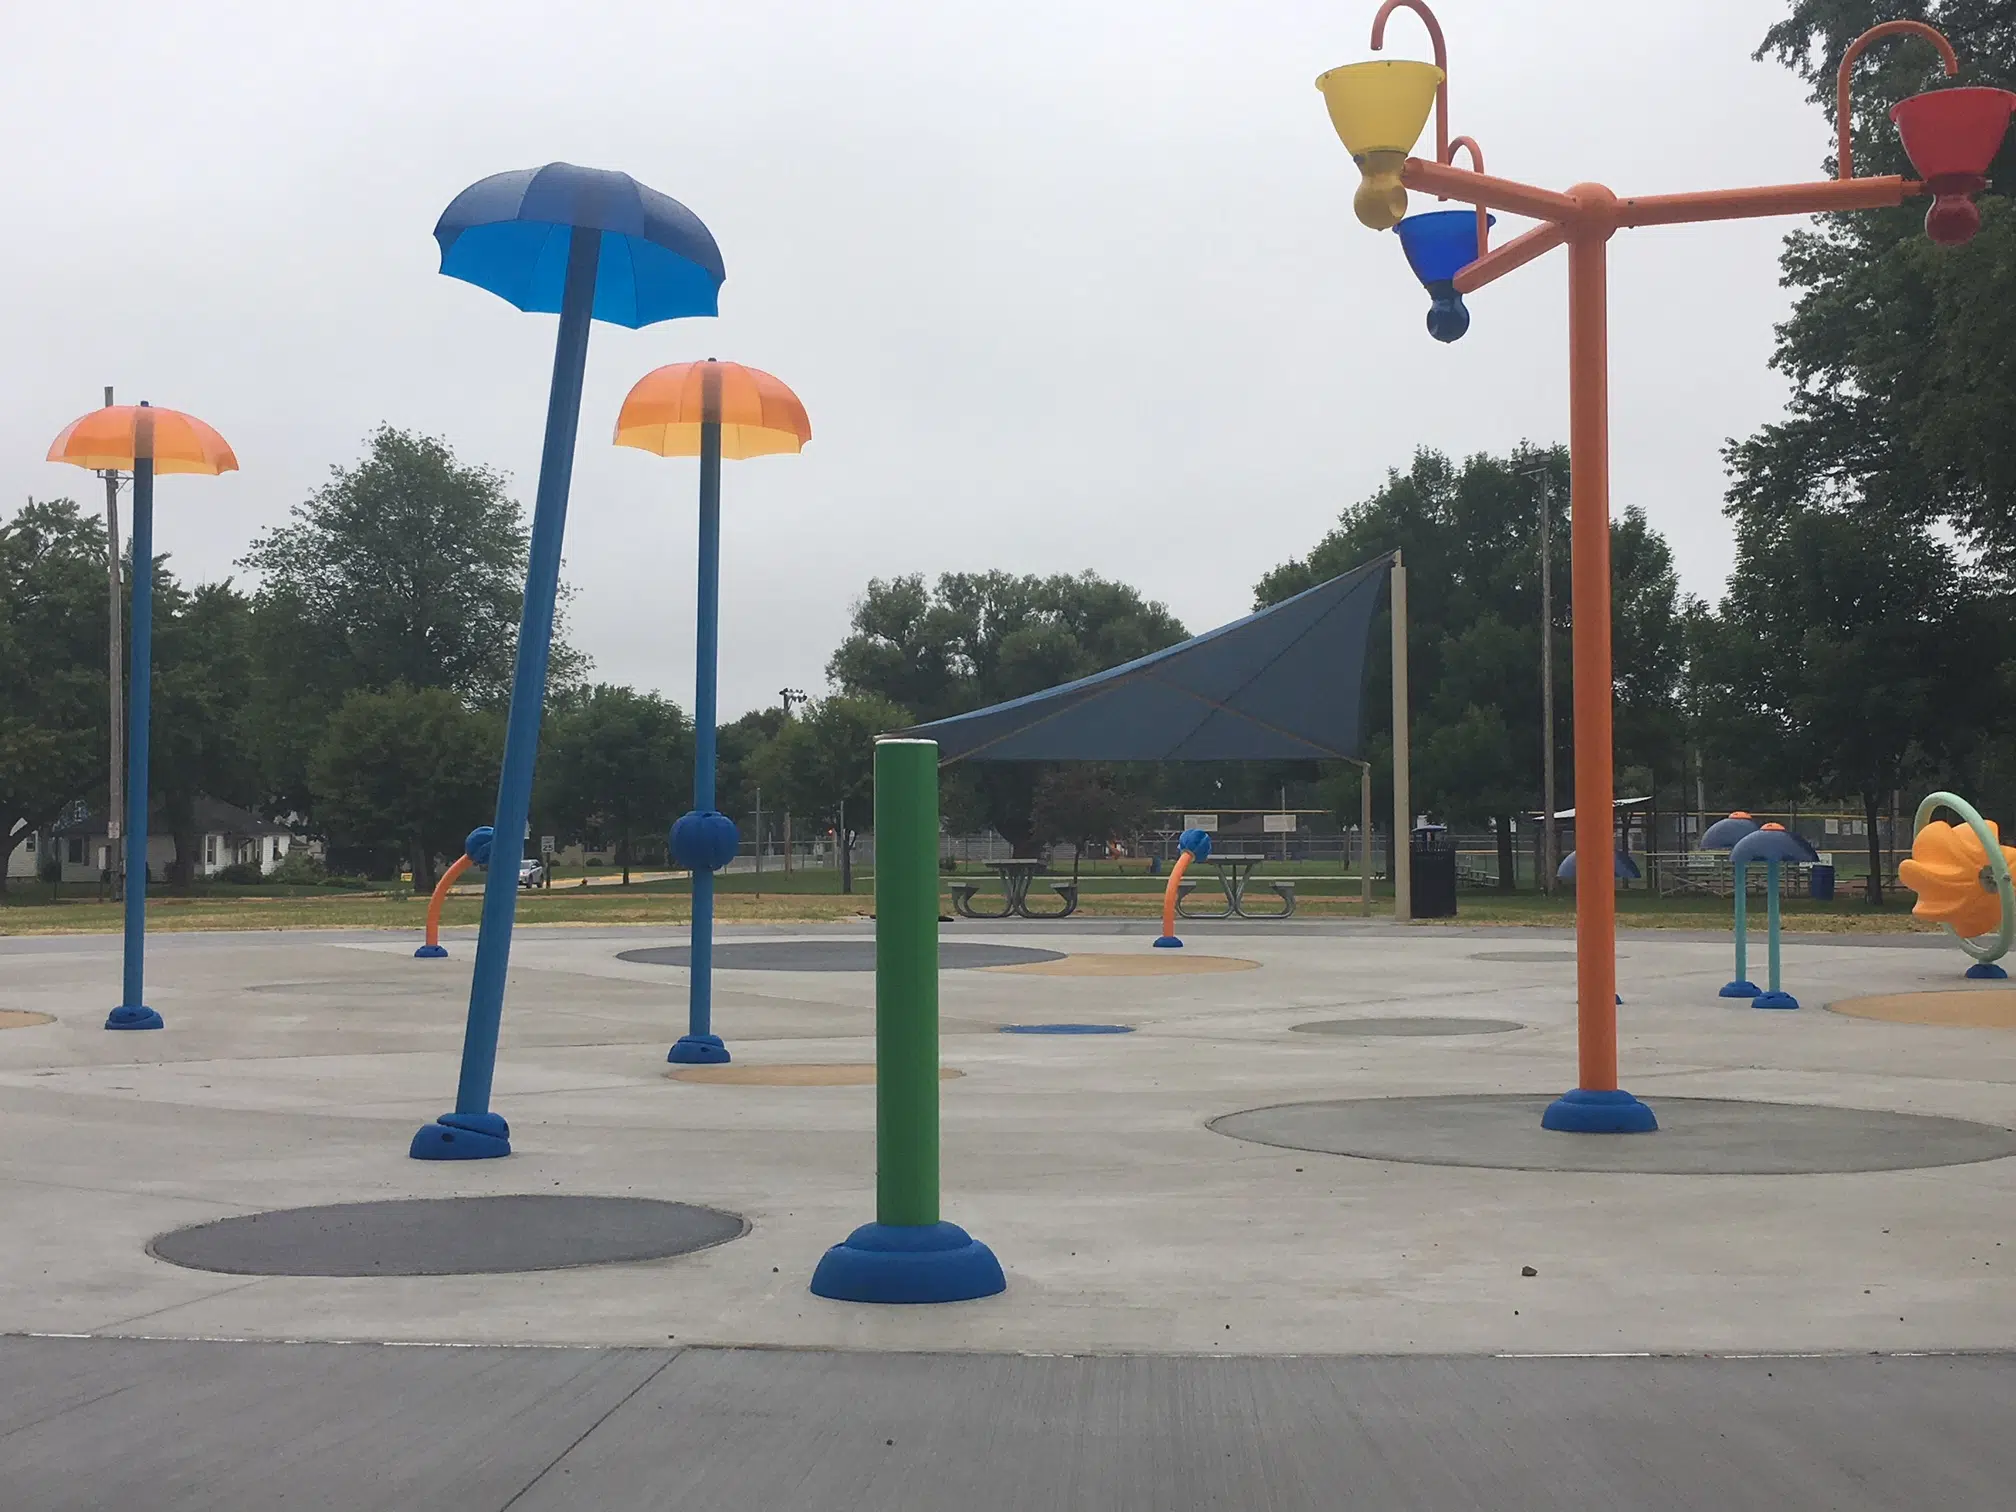 Splash Pad Final Touches set to be done by 20th